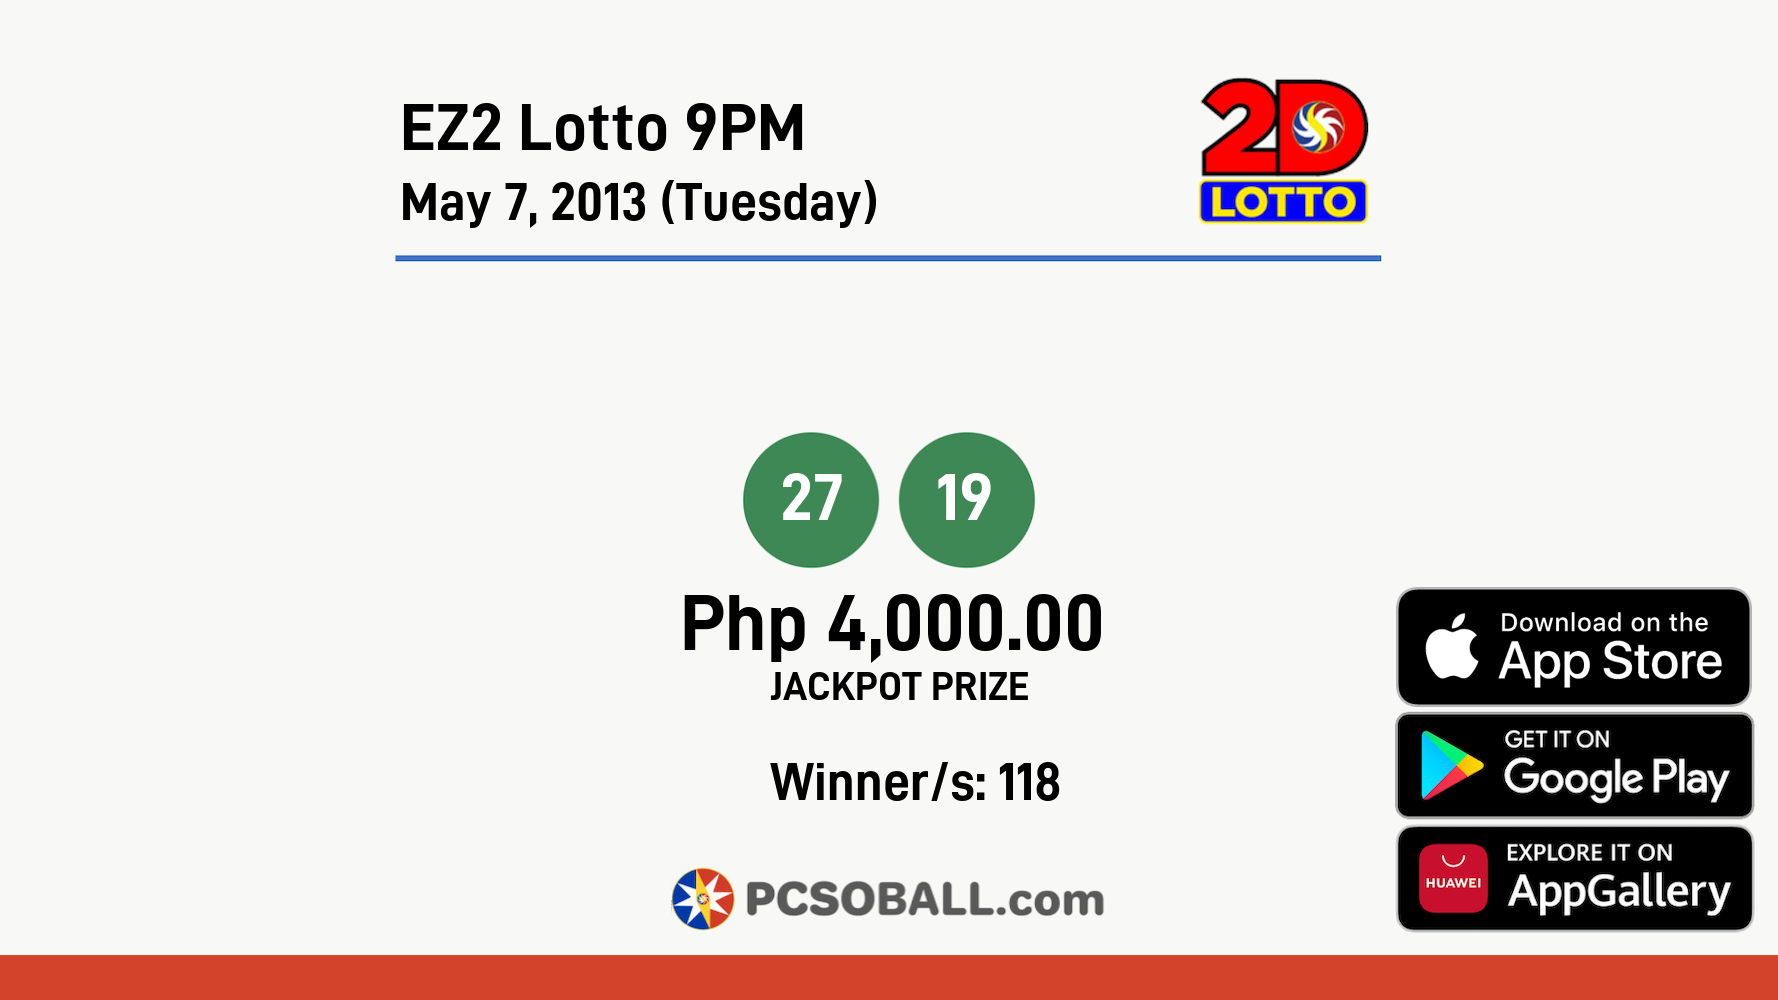 EZ2 Lotto 9PM May 7, 2013 (Tuesday) Result